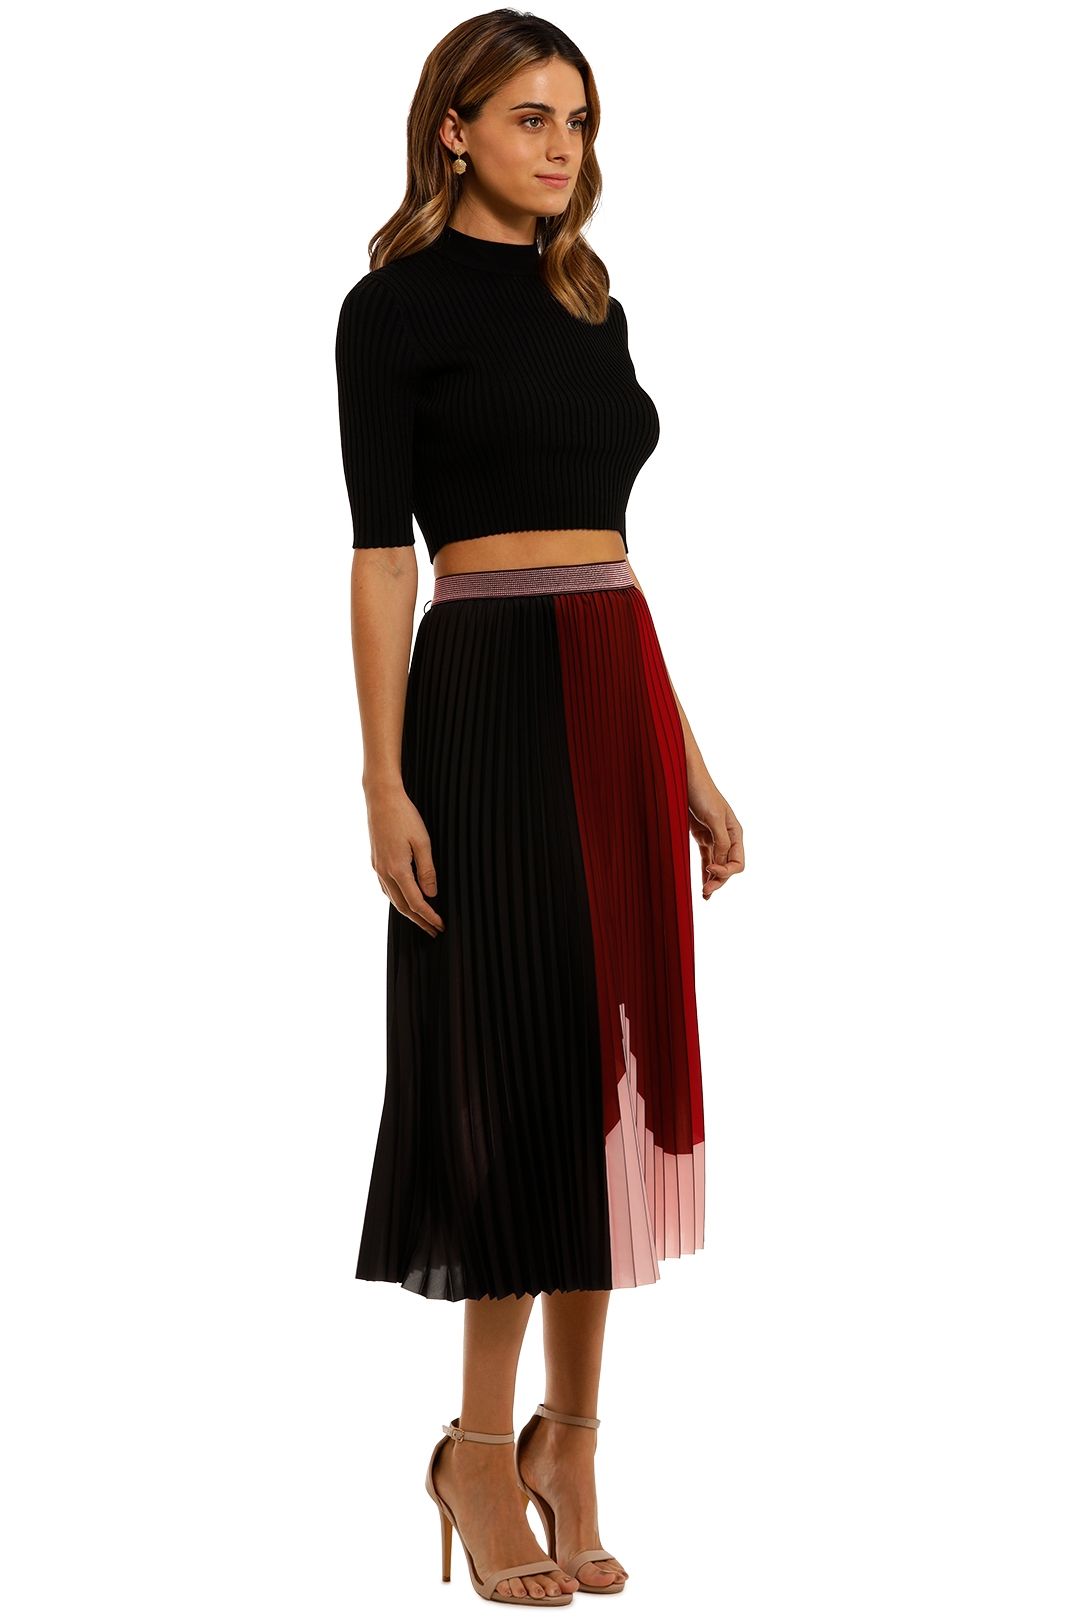 Coop by Trelise Cooper Pleat Emotion Skirt Wine Mix Pleated